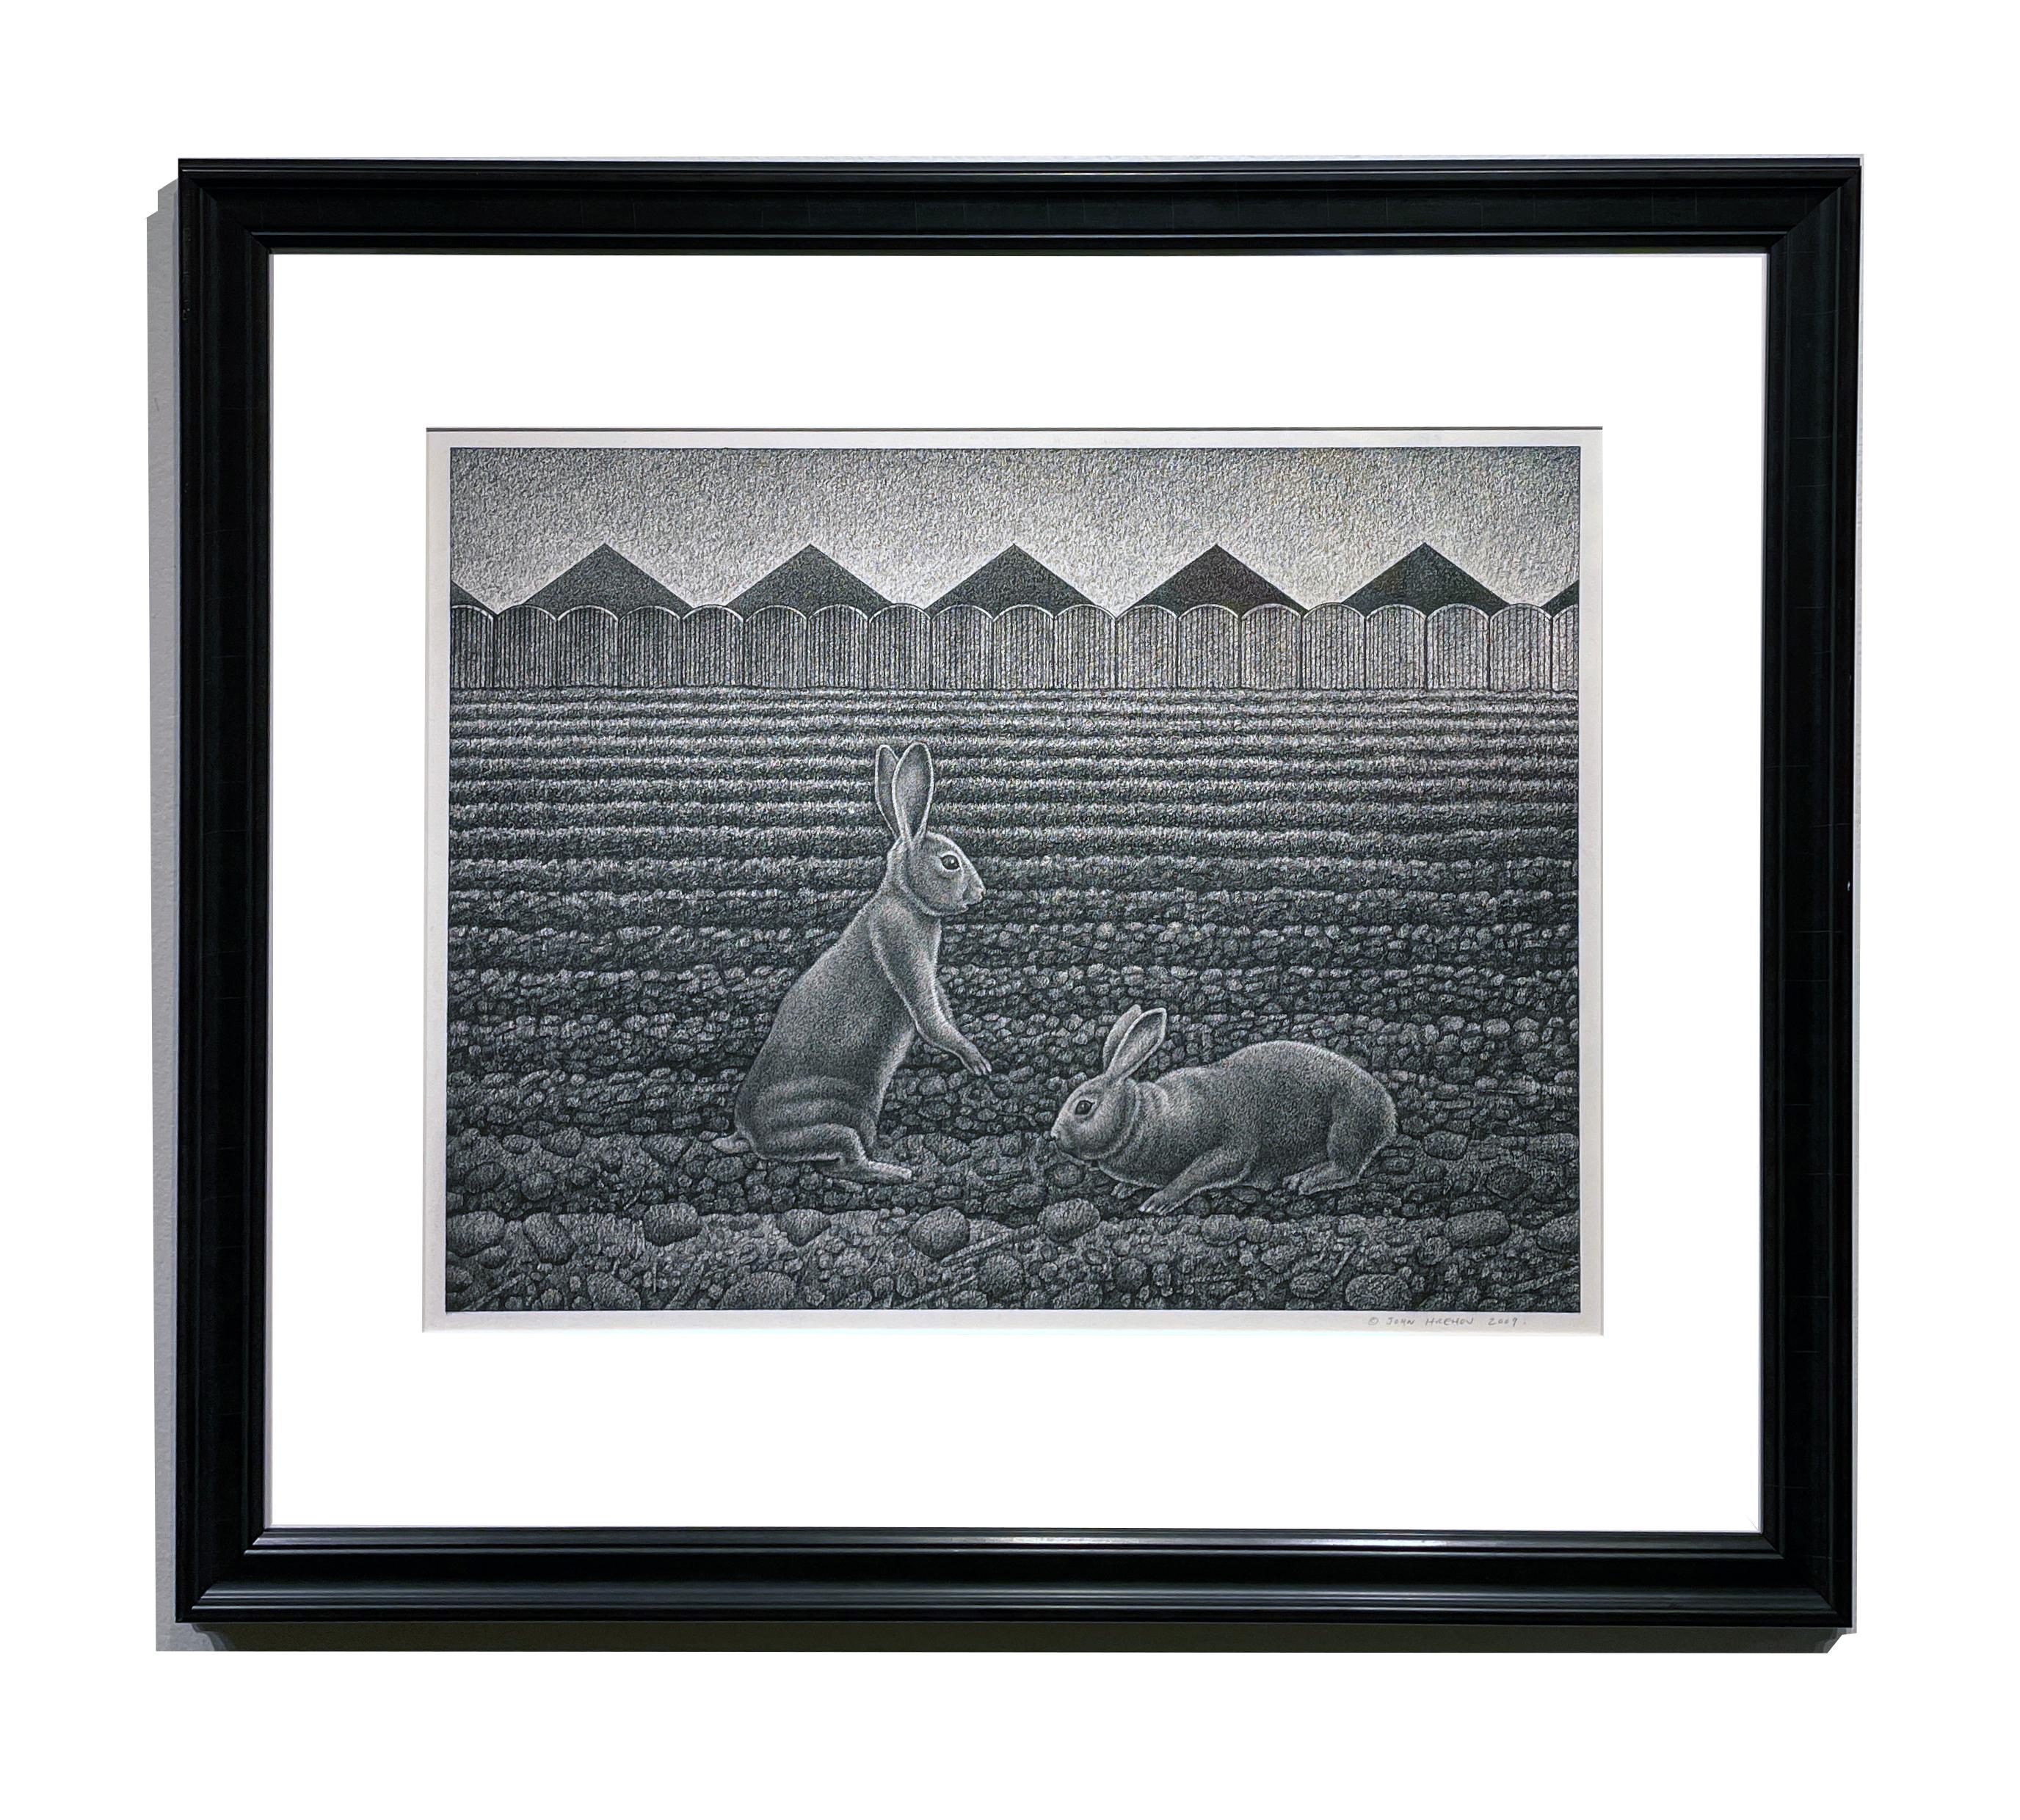 Glean - Landscape, Sown Field w/ Two Rabbits, Graphite, Archival Paper - Painting by John Hrehov